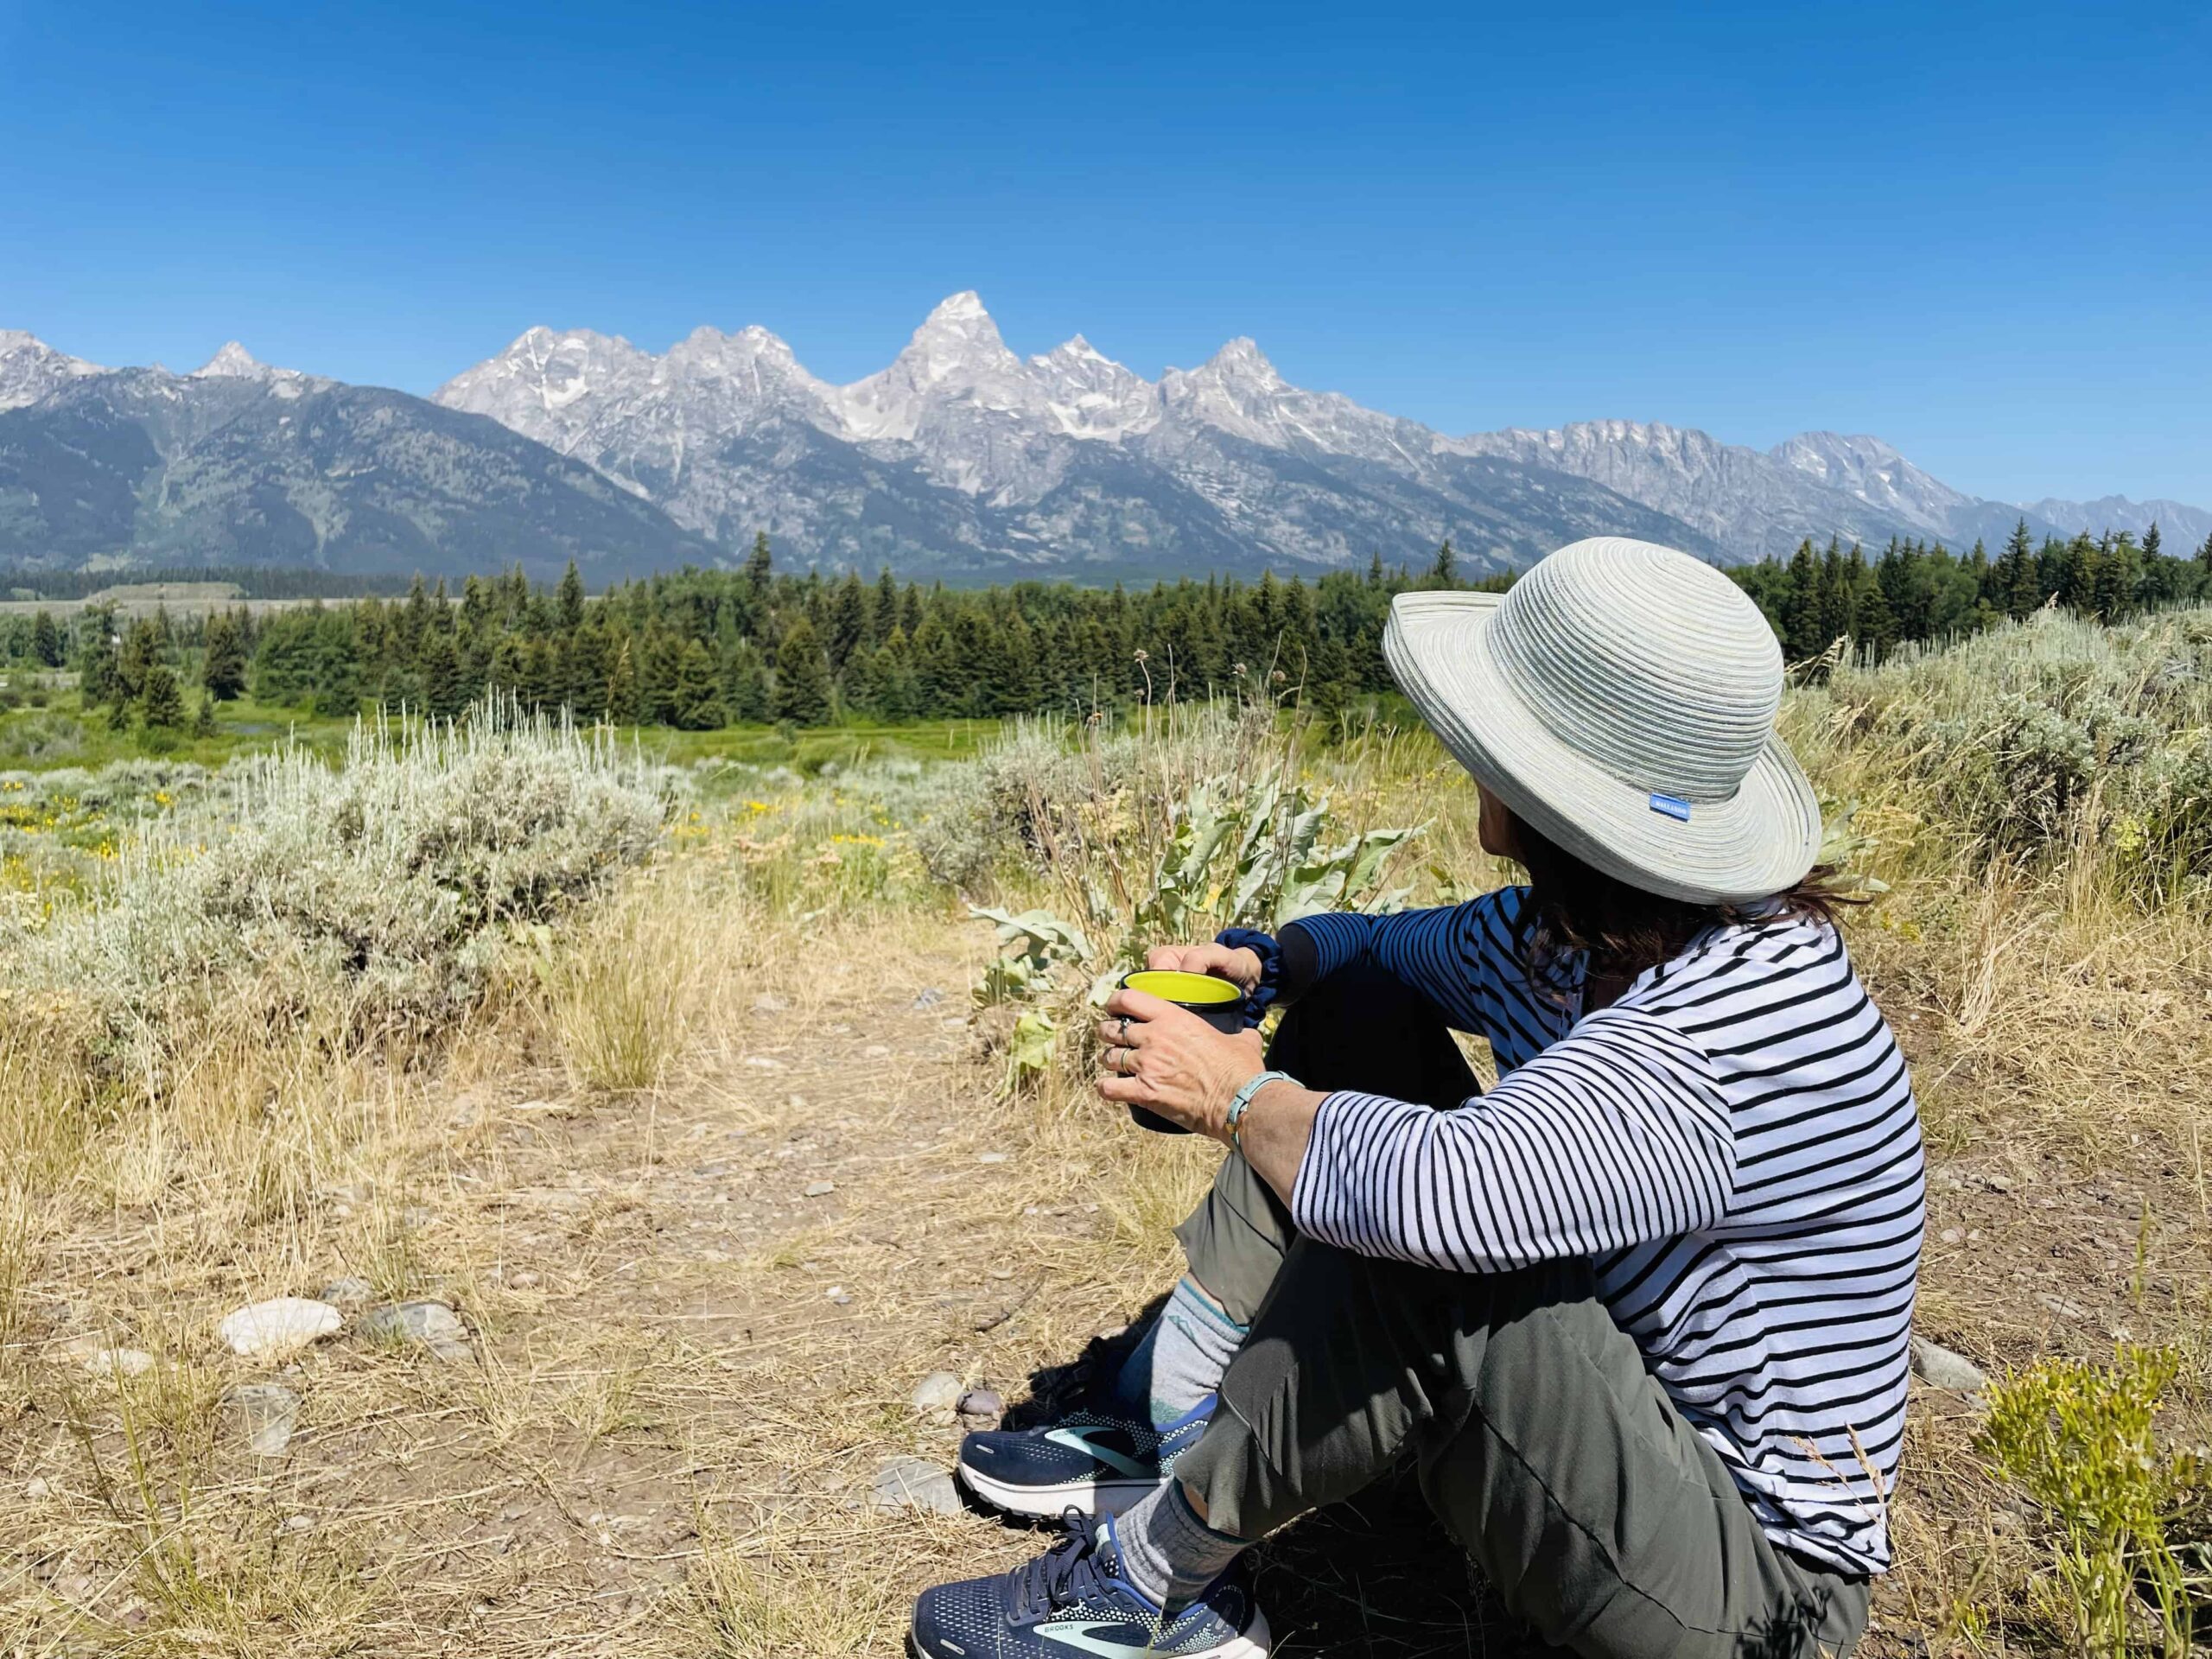 Dalia taking time out in Grand Tetons National Park.